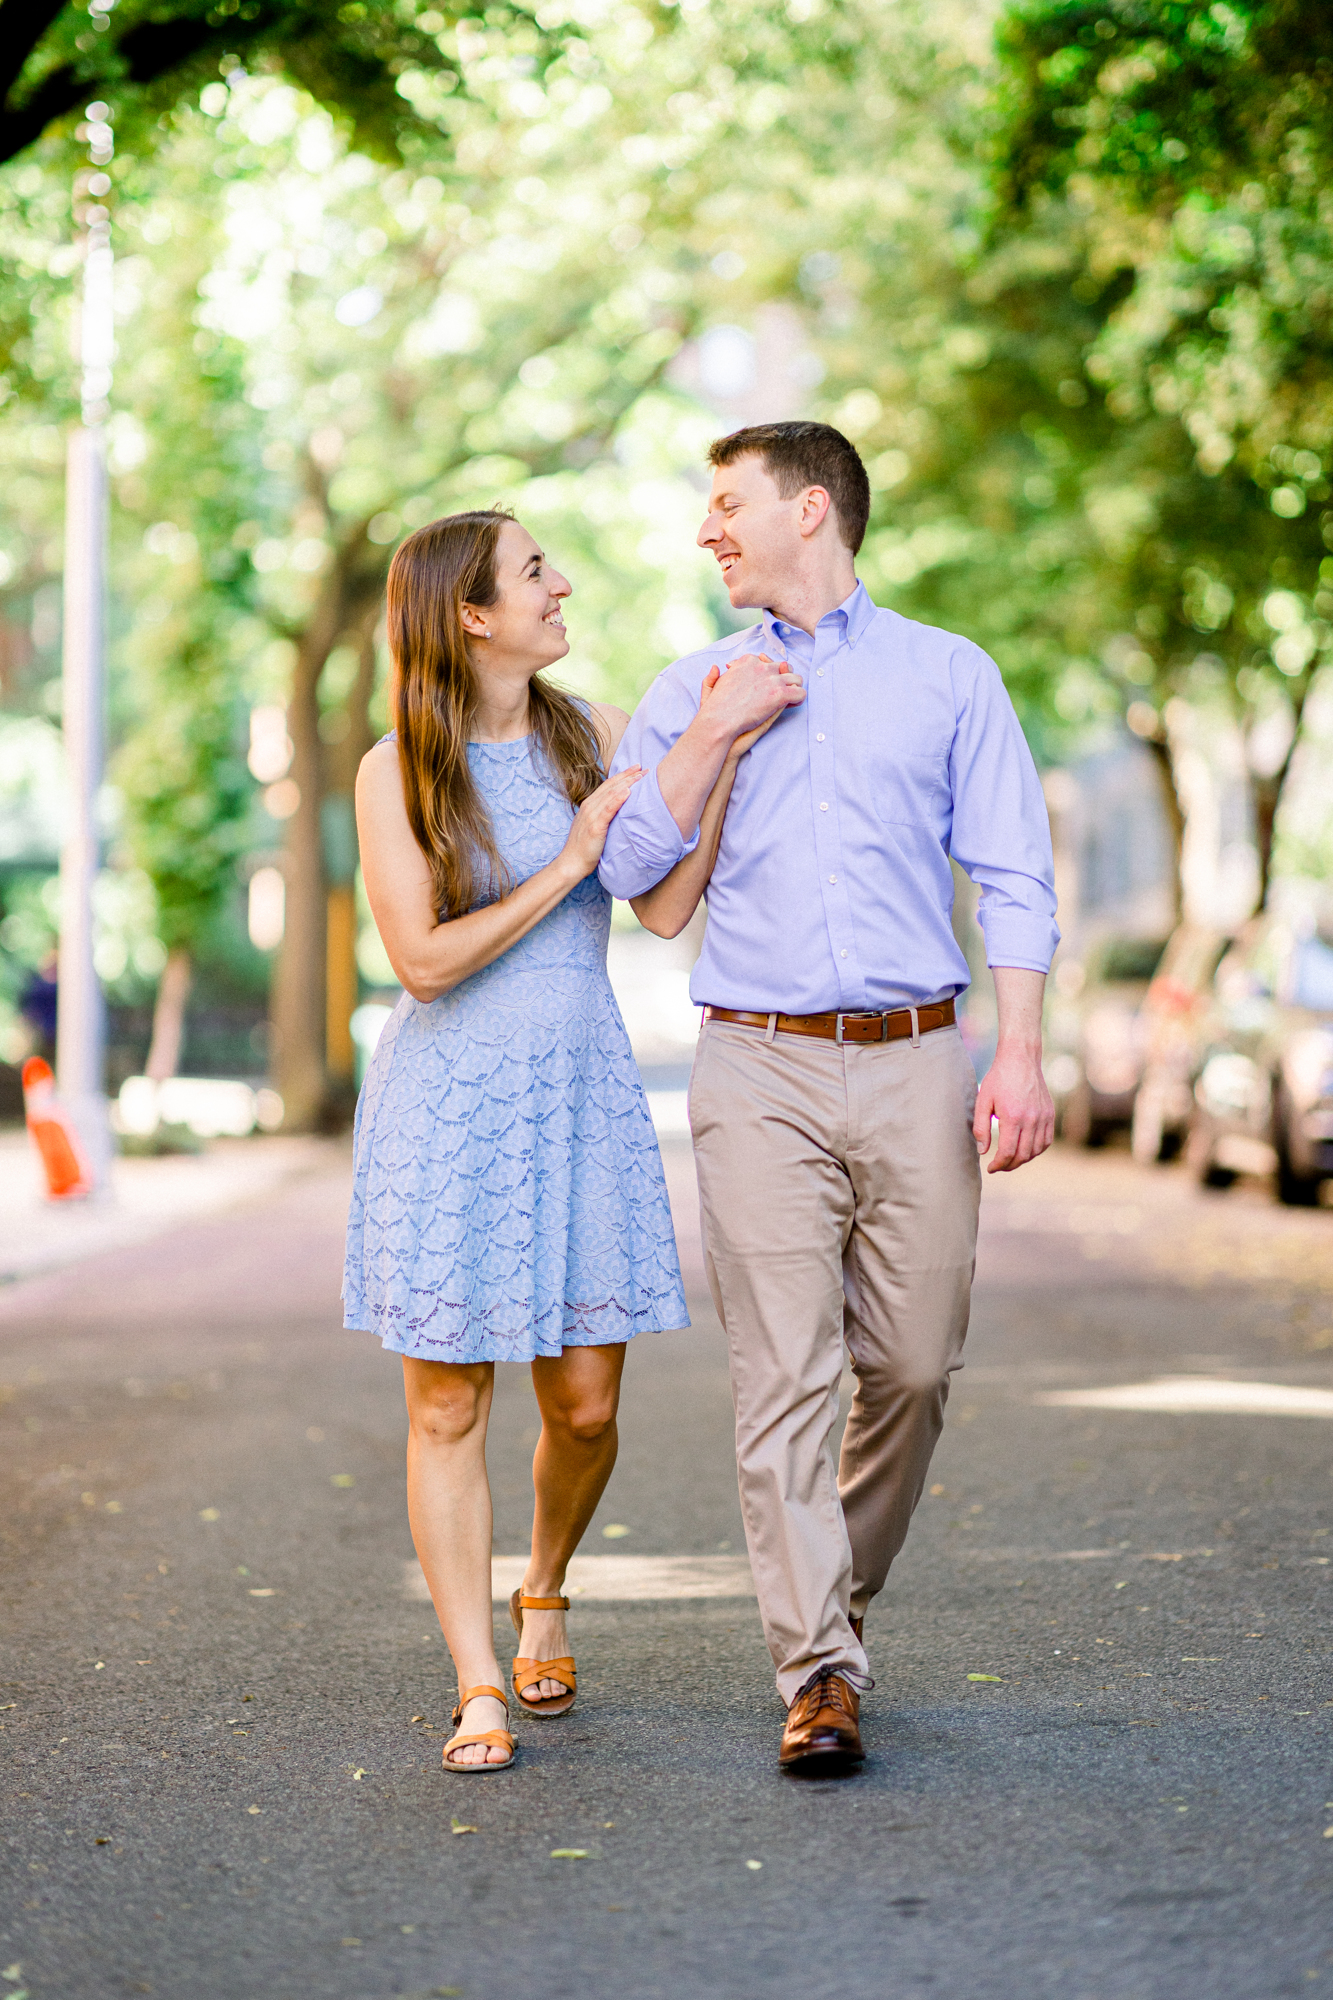 Magical Brooklyn Heights Promenade Engagement Photography